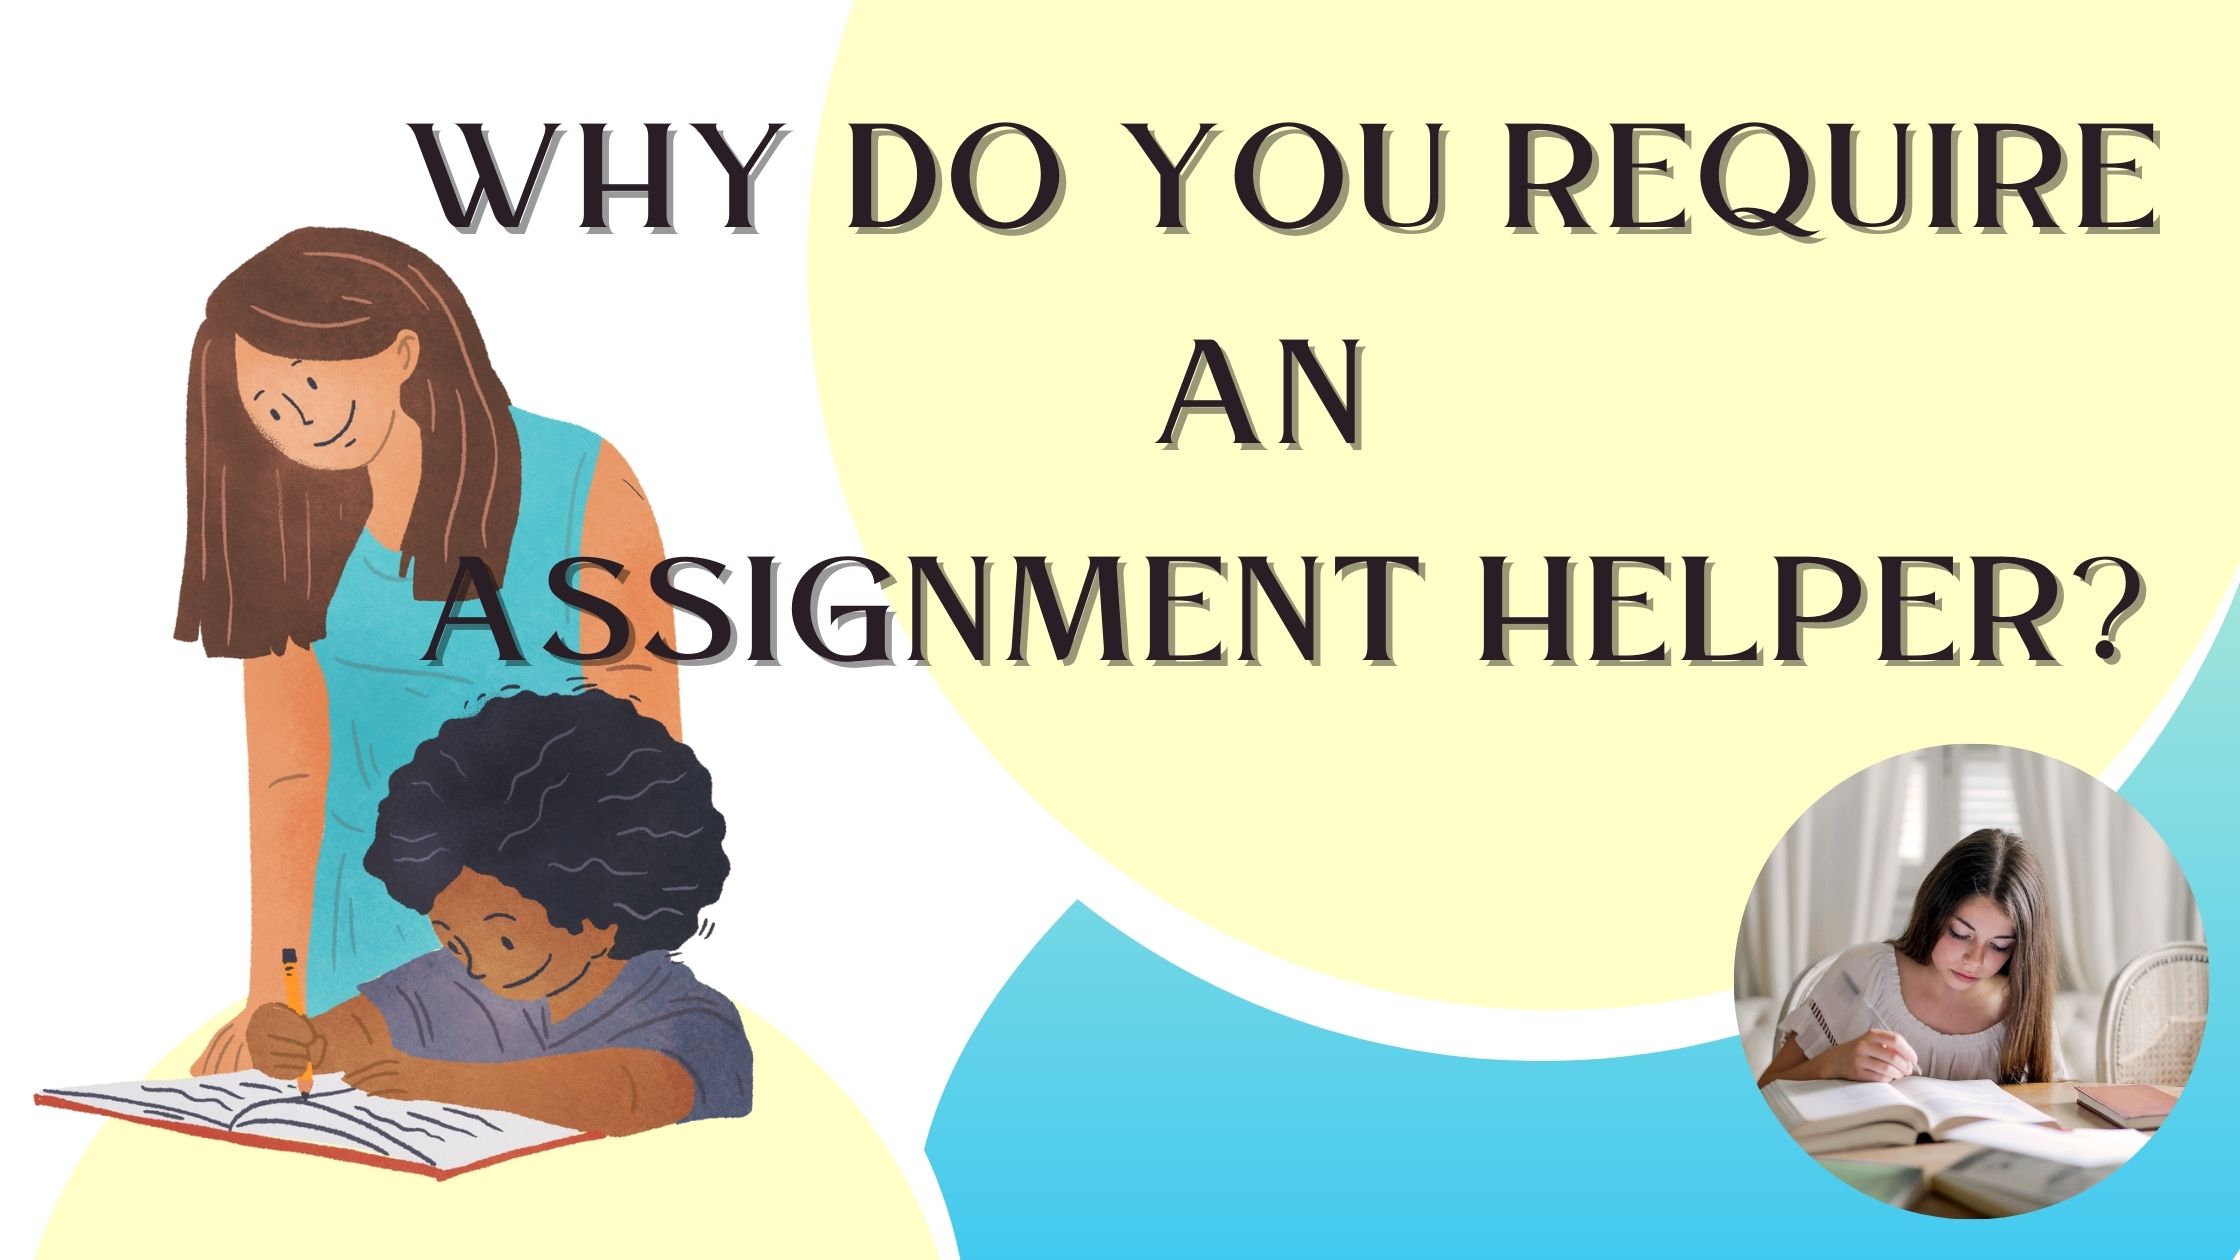 Why Do You Require An Assignment Helper?